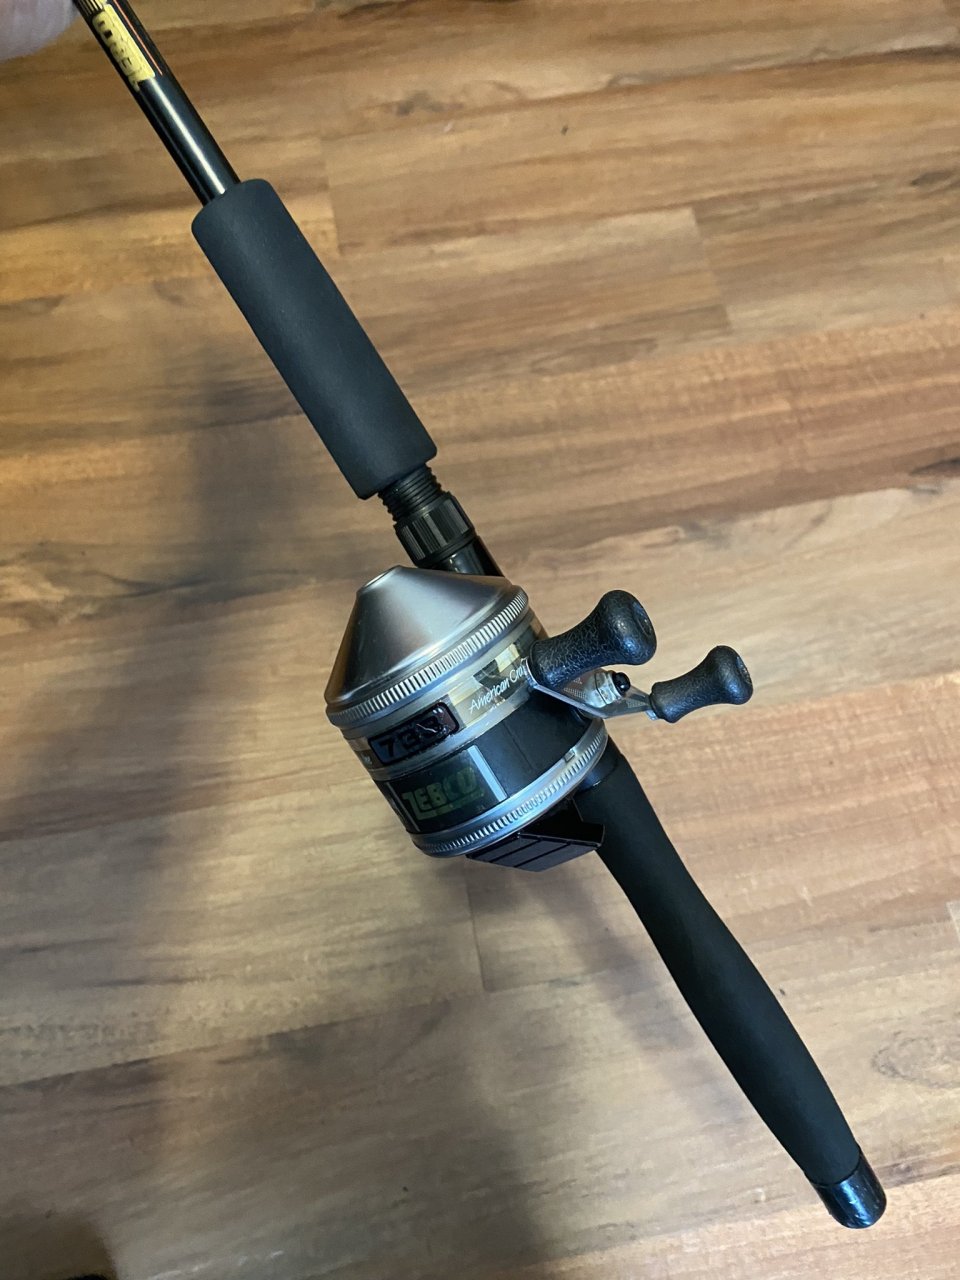 Did Zebco Make Some Junk When They Made The 733 Hawg Reel? I Was